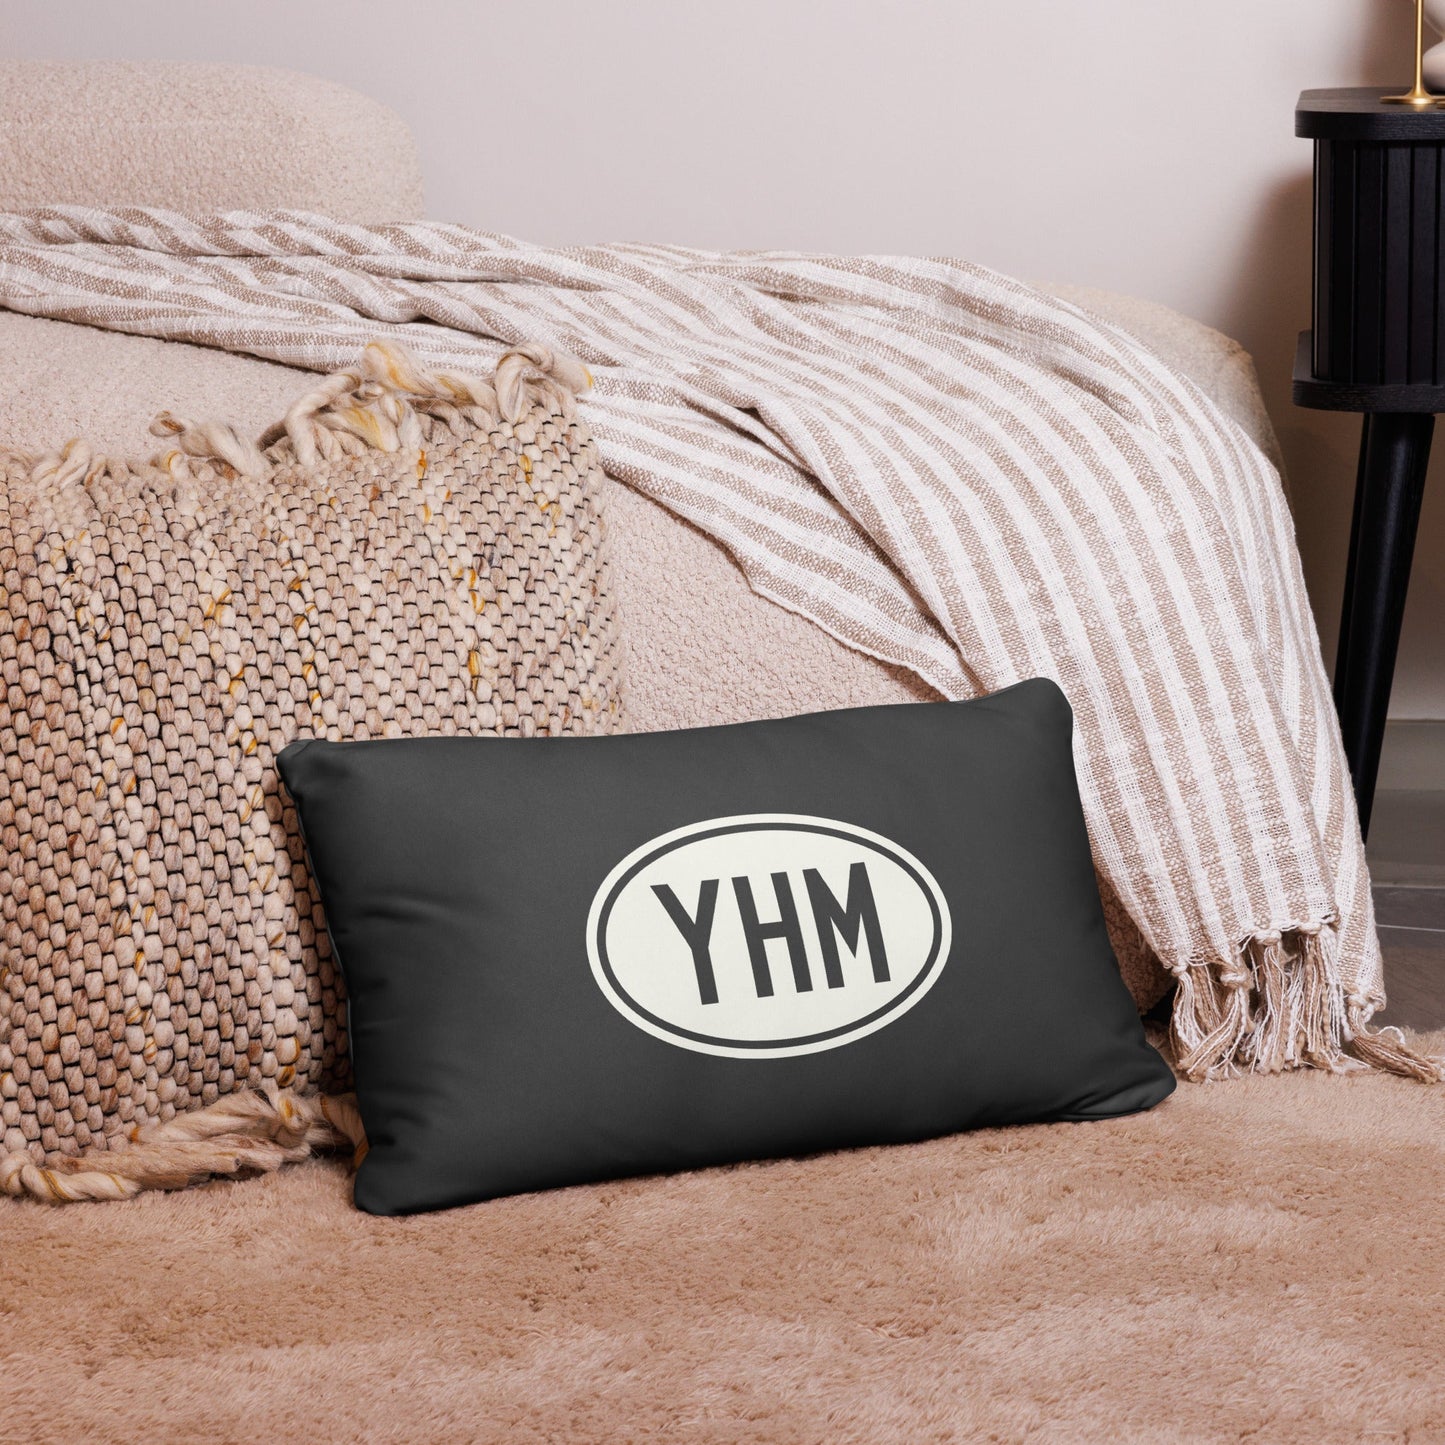 Unique Travel Gift Throw Pillow - White Oval • MSY New Orleans • YHM Designs - Image 05